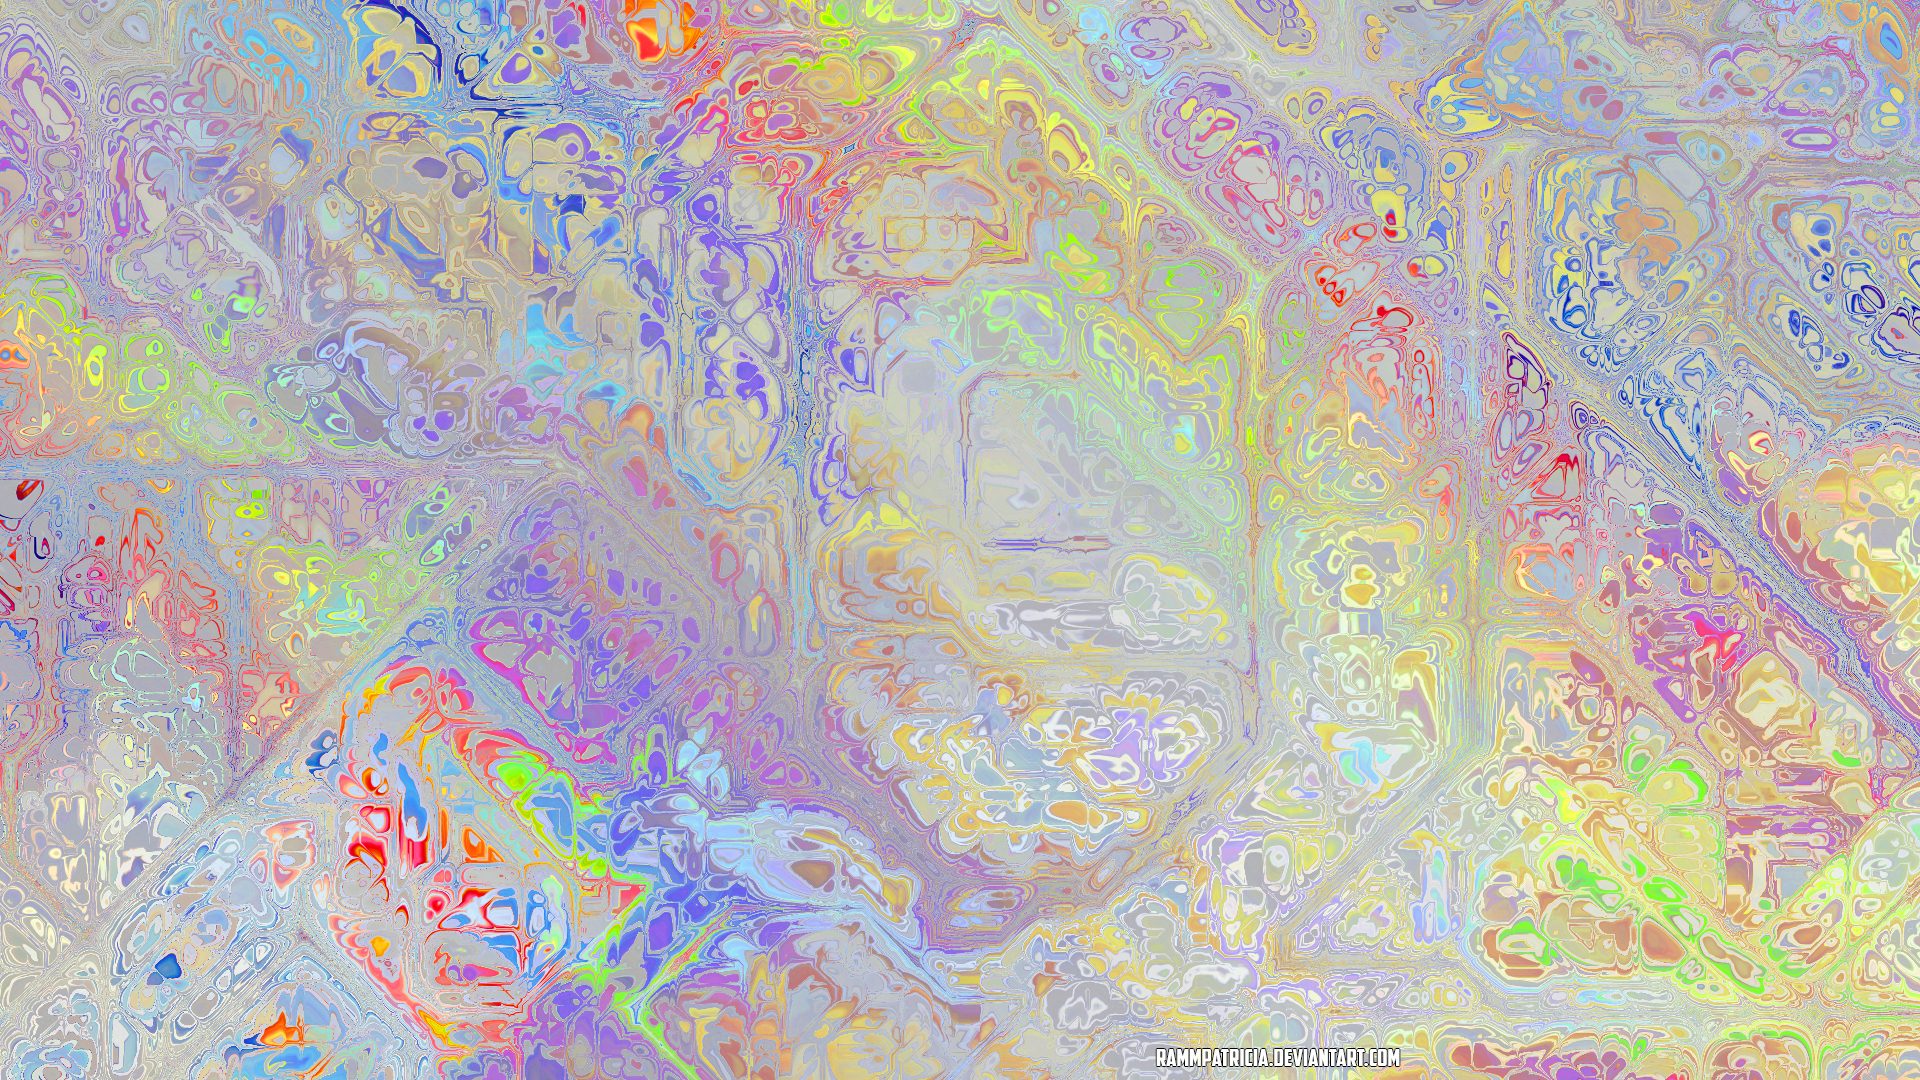 General 1920x1080 RammPatricia abstract digital art colorful iridescent